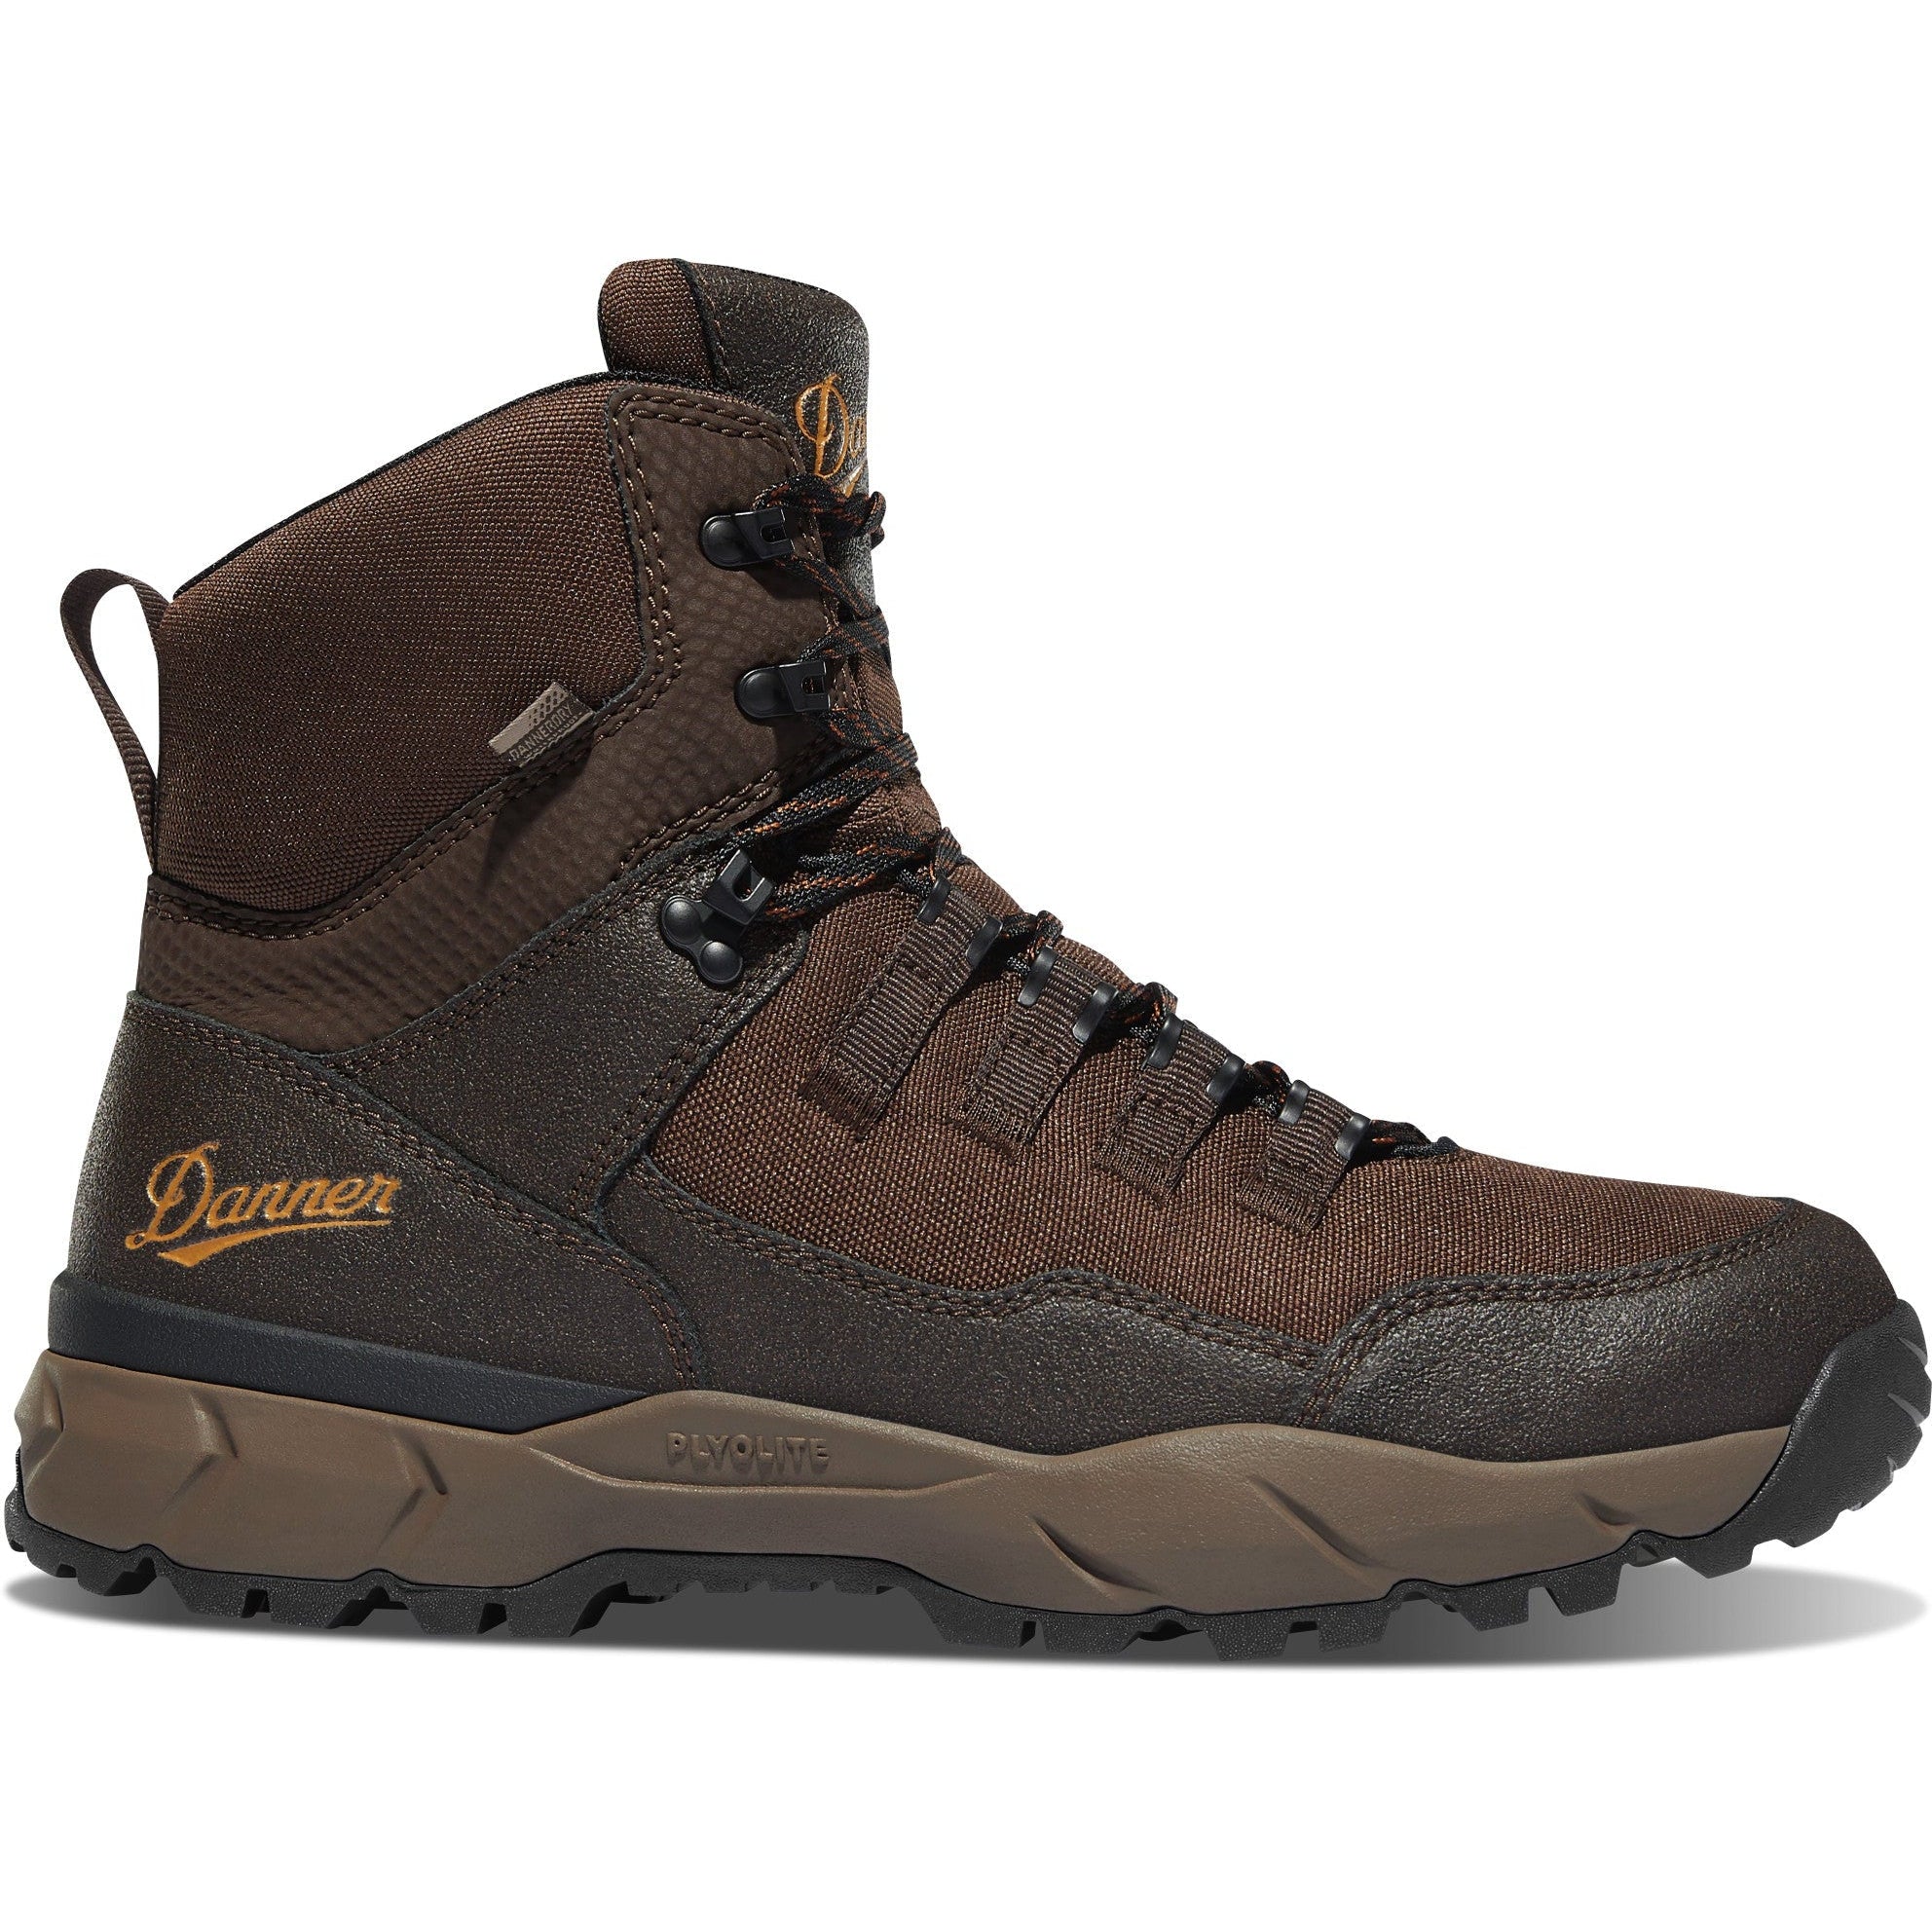 Danner Men's Vital Trail 6" WP Hiking Boot - Coffee Brown - 65300  - Overlook Boots